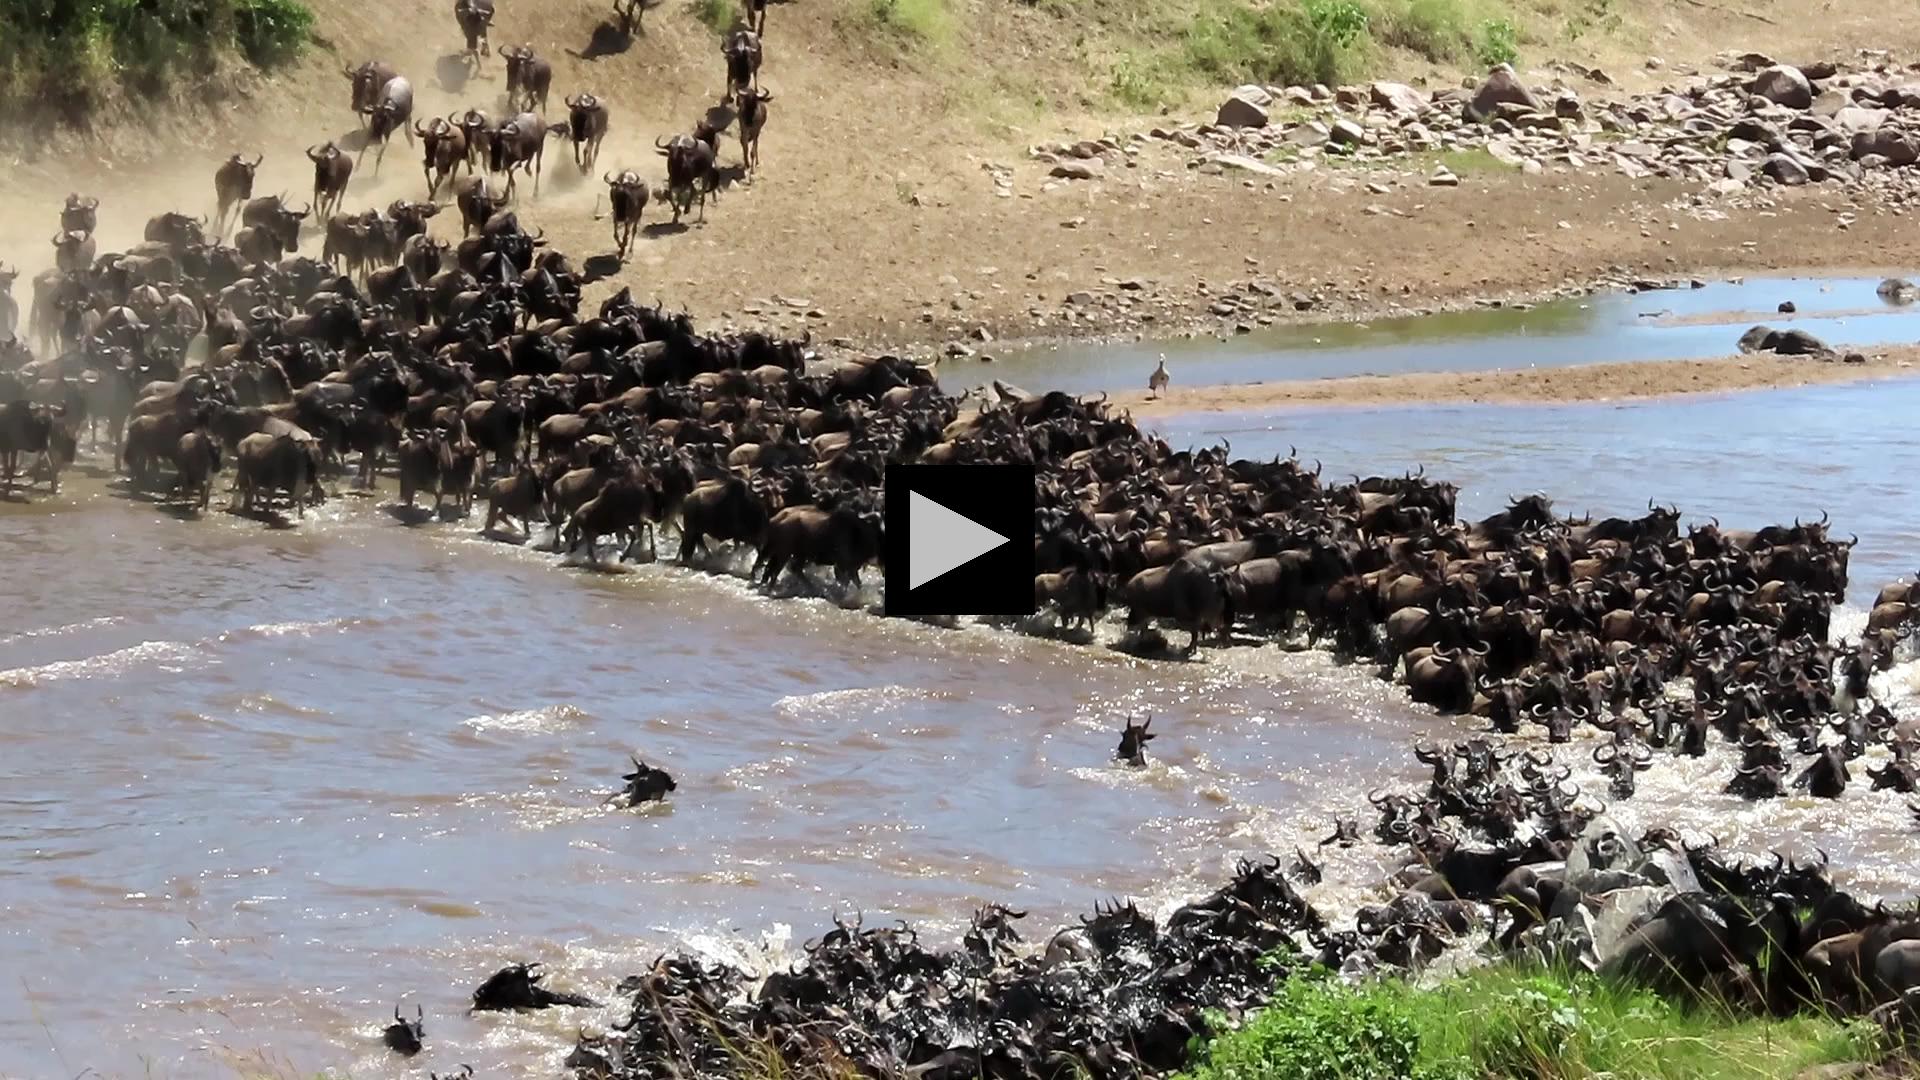 Crossing the Mara River - The Great Wildebeest Migration